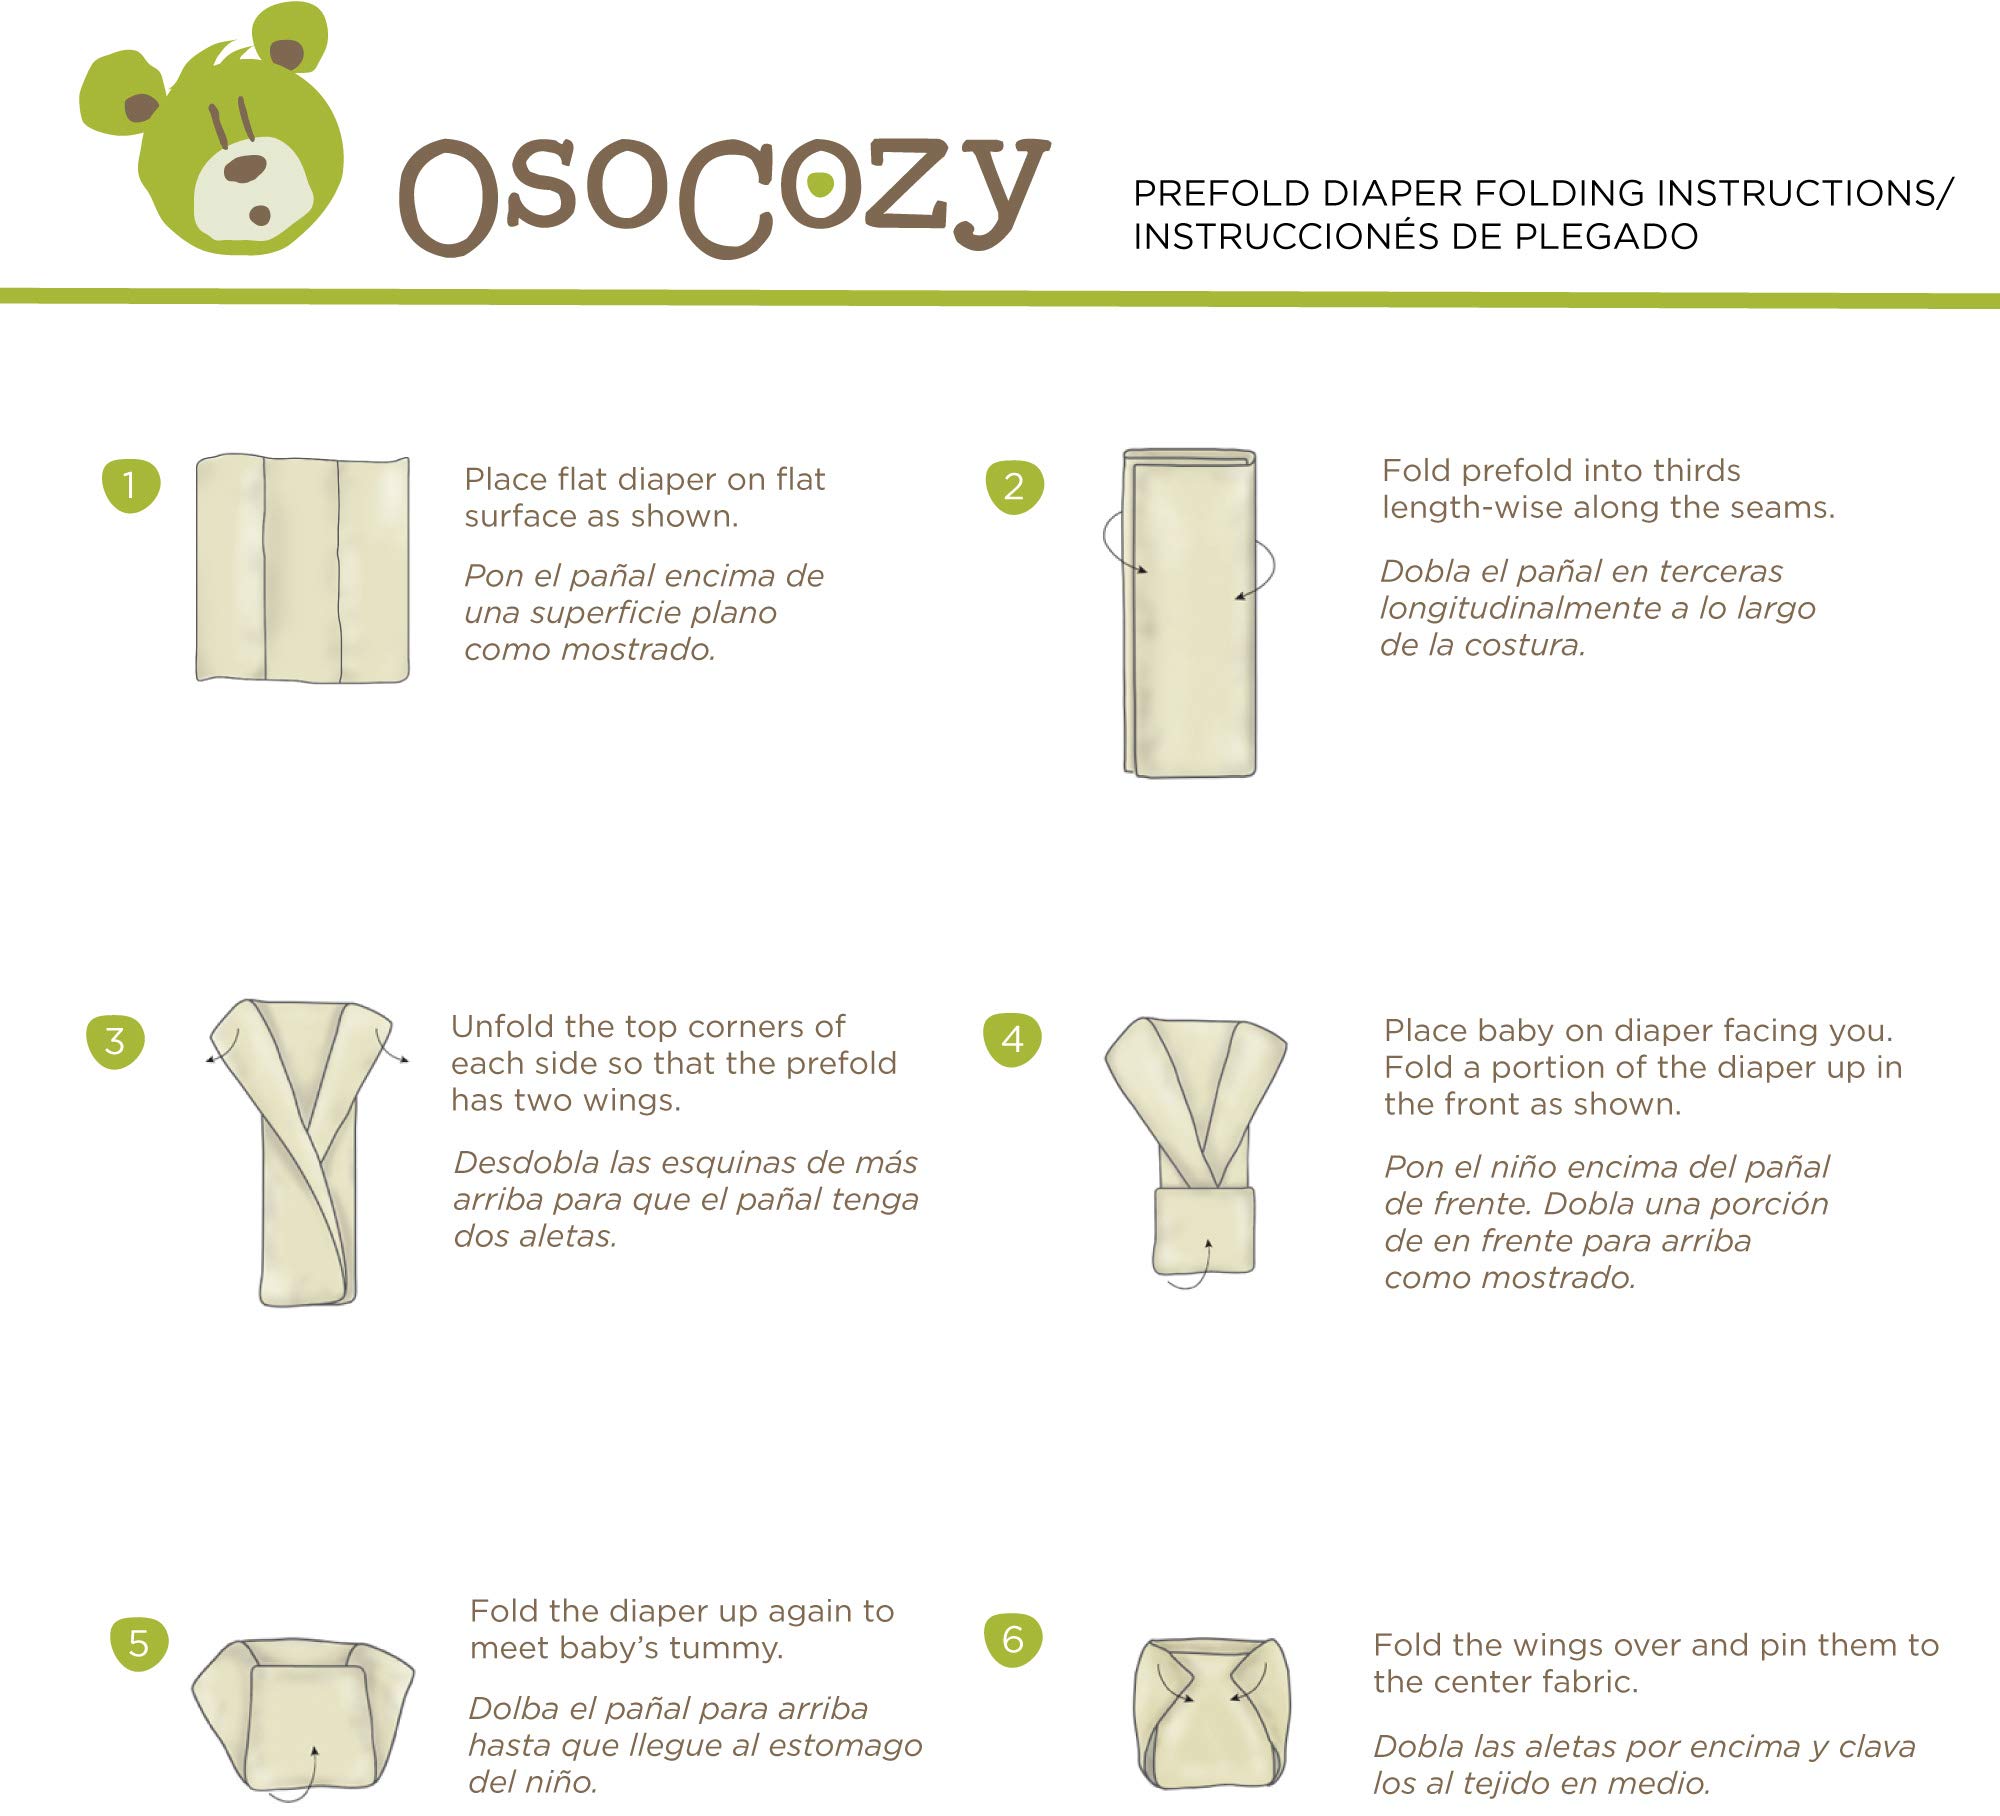 OsoCozy Unbleached Prefold Cloth Diapers – Soft and Absorbent Baby Diapers Made of 100% Unbleached Cotton - 14.5